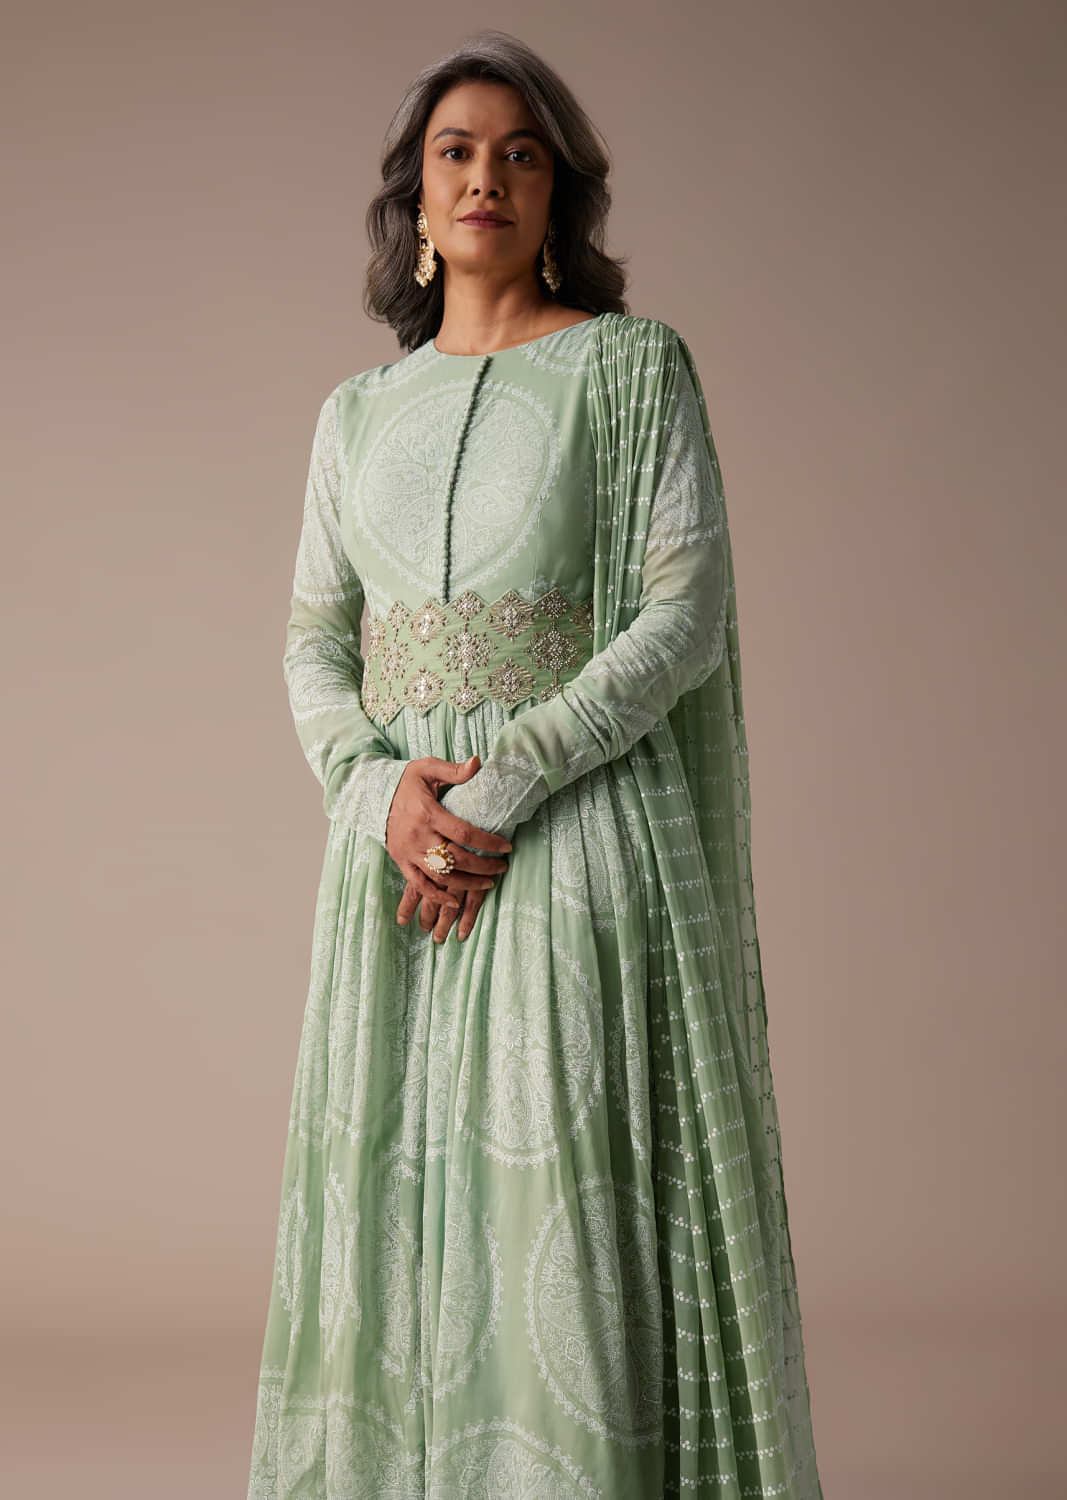 Pista Green Anarkali Suit In Georgette With Attached Dupatta And Floral Embroidered Waistbelt